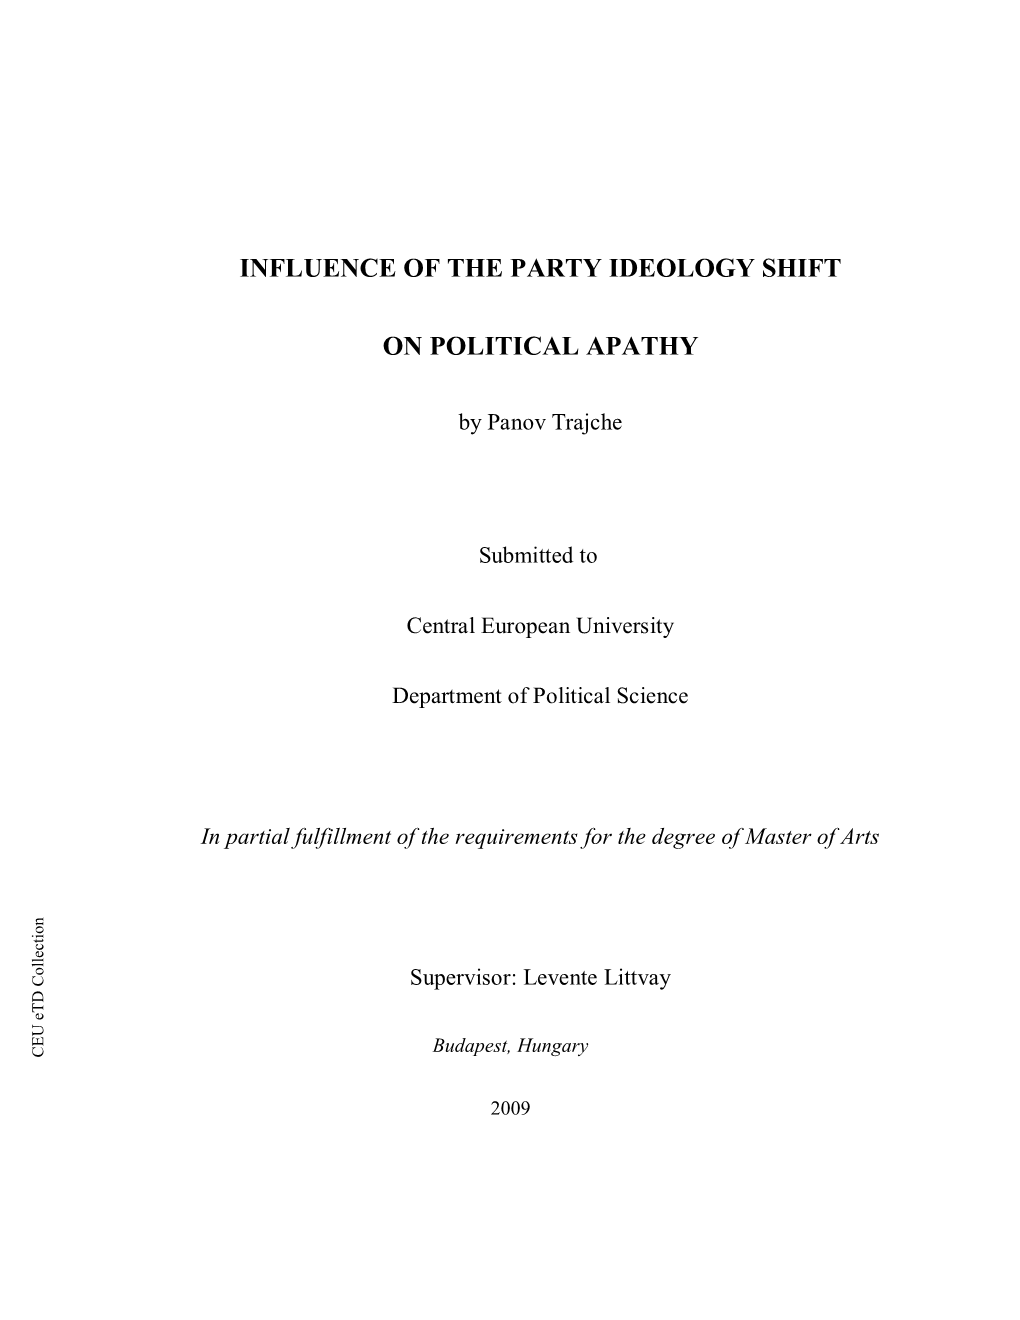 Influence of the Party Ideology Shift on Political Apathy